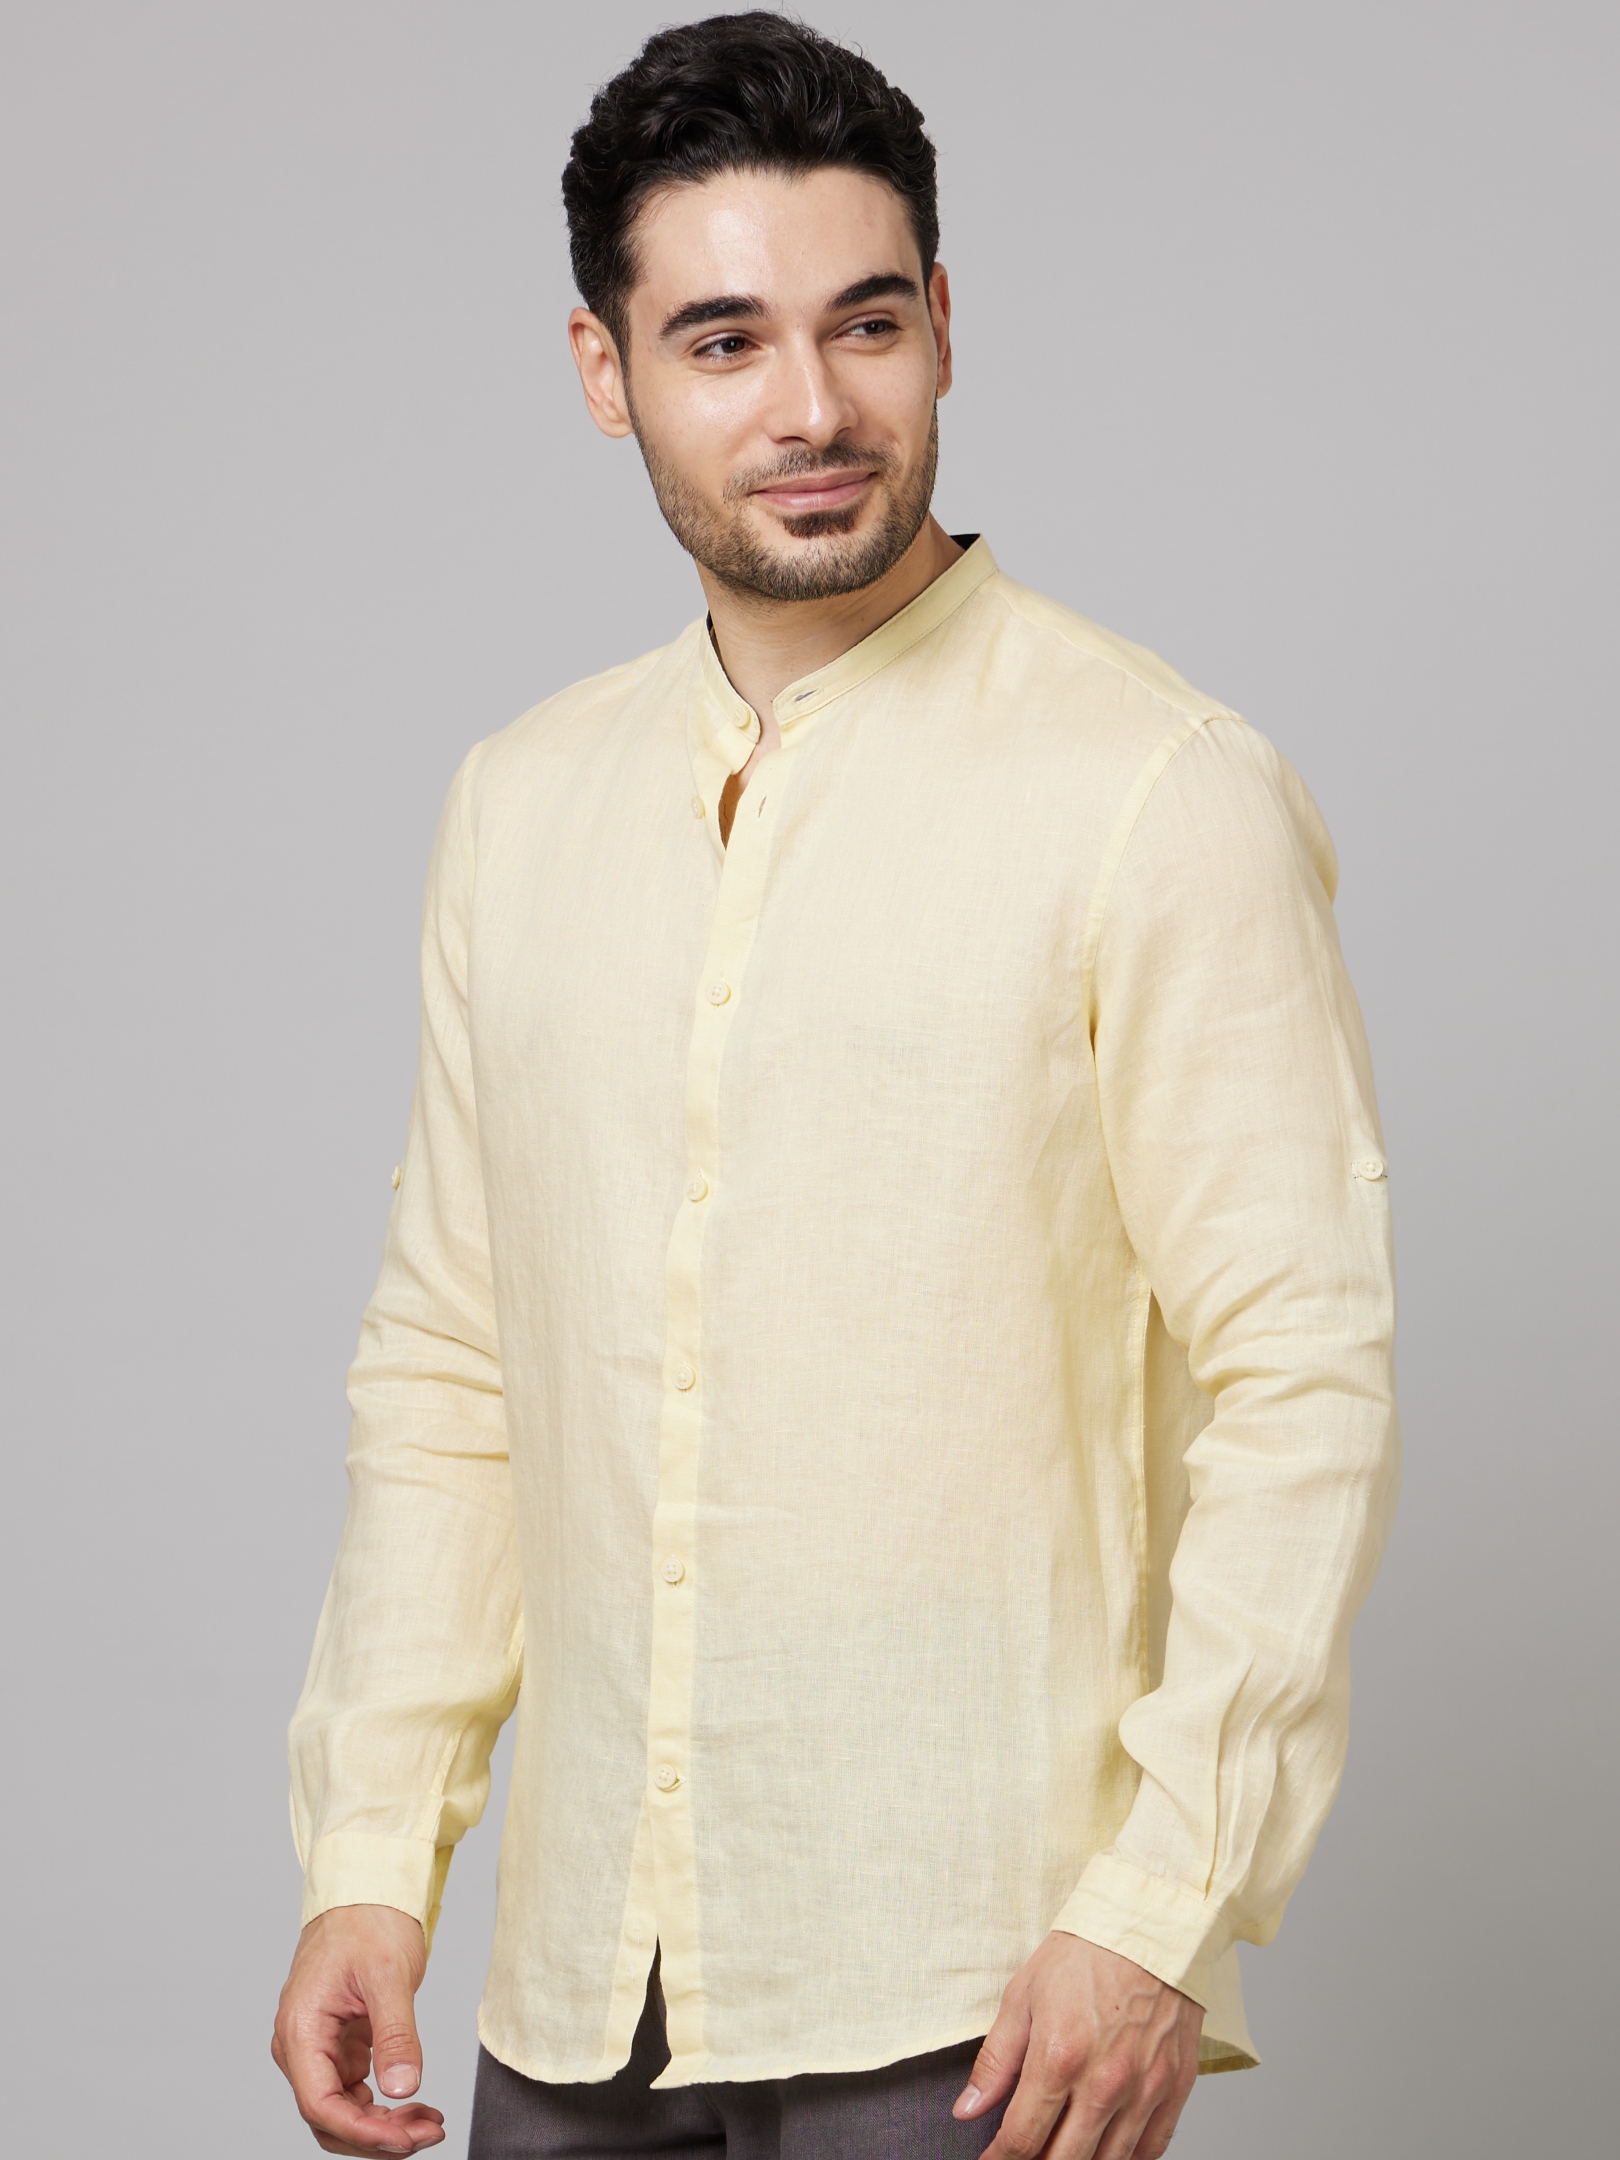 Men's Yellow Solid Casual Shirts